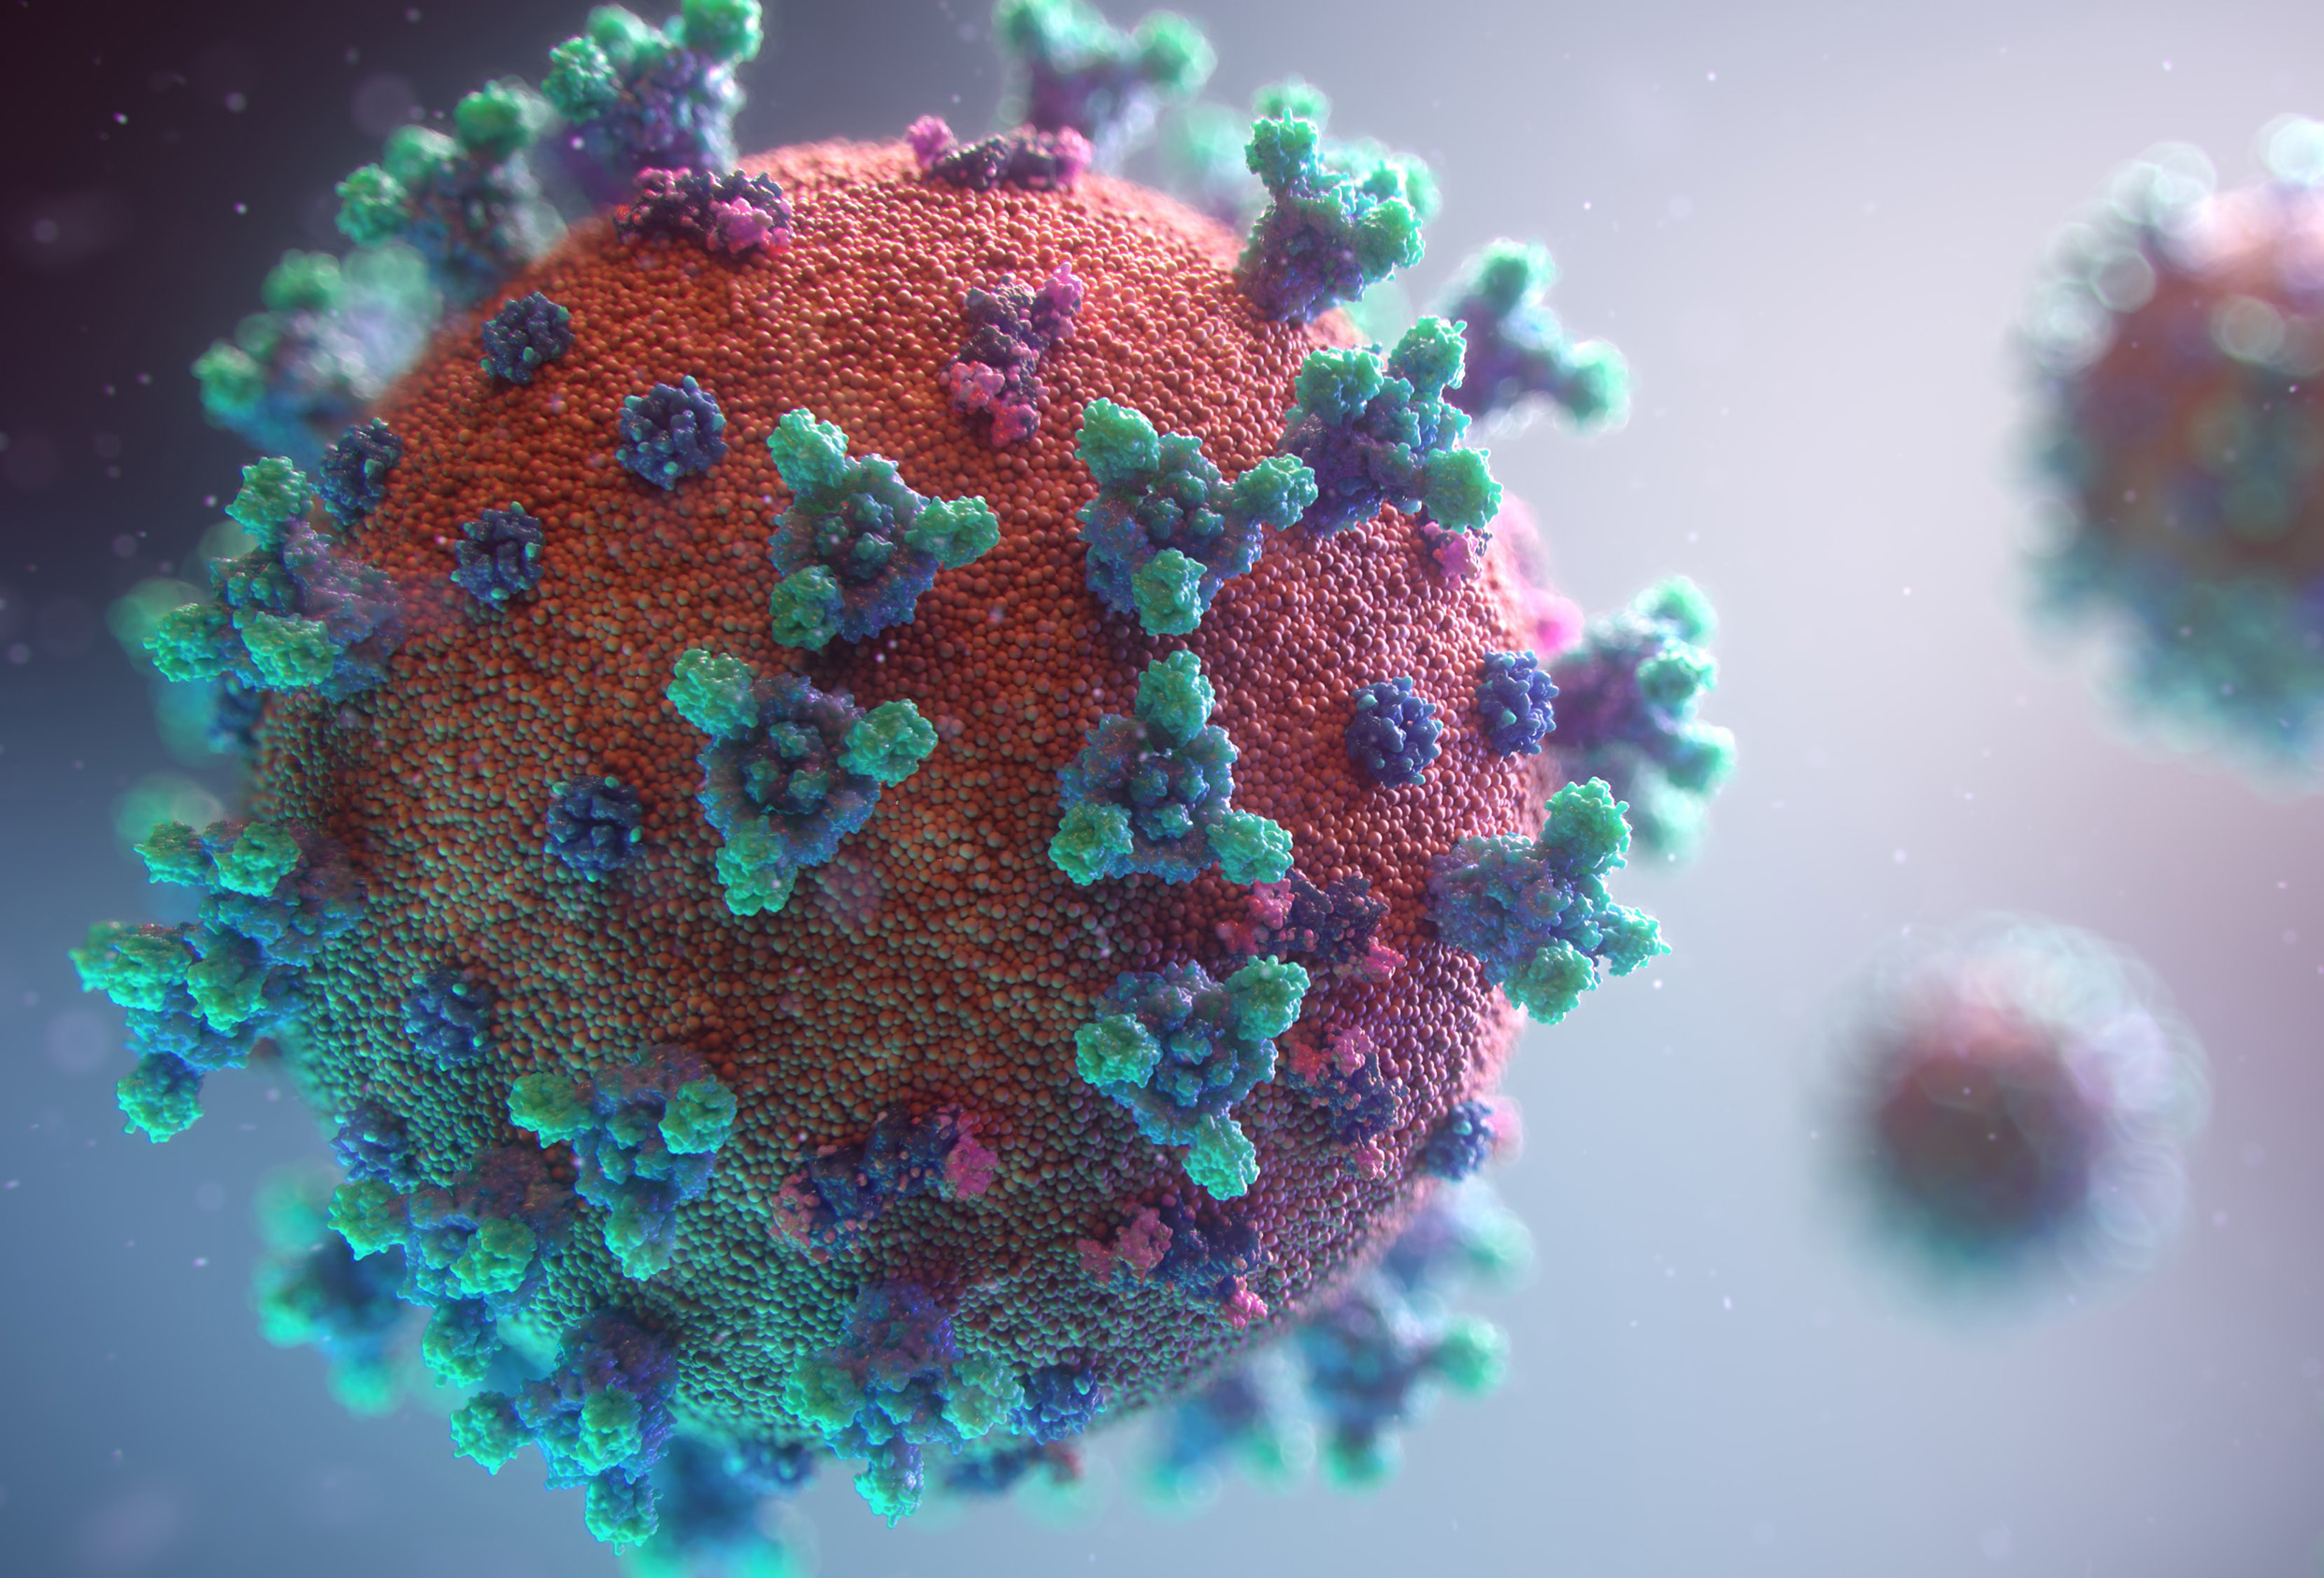 New visualization of the Covid-19 virus